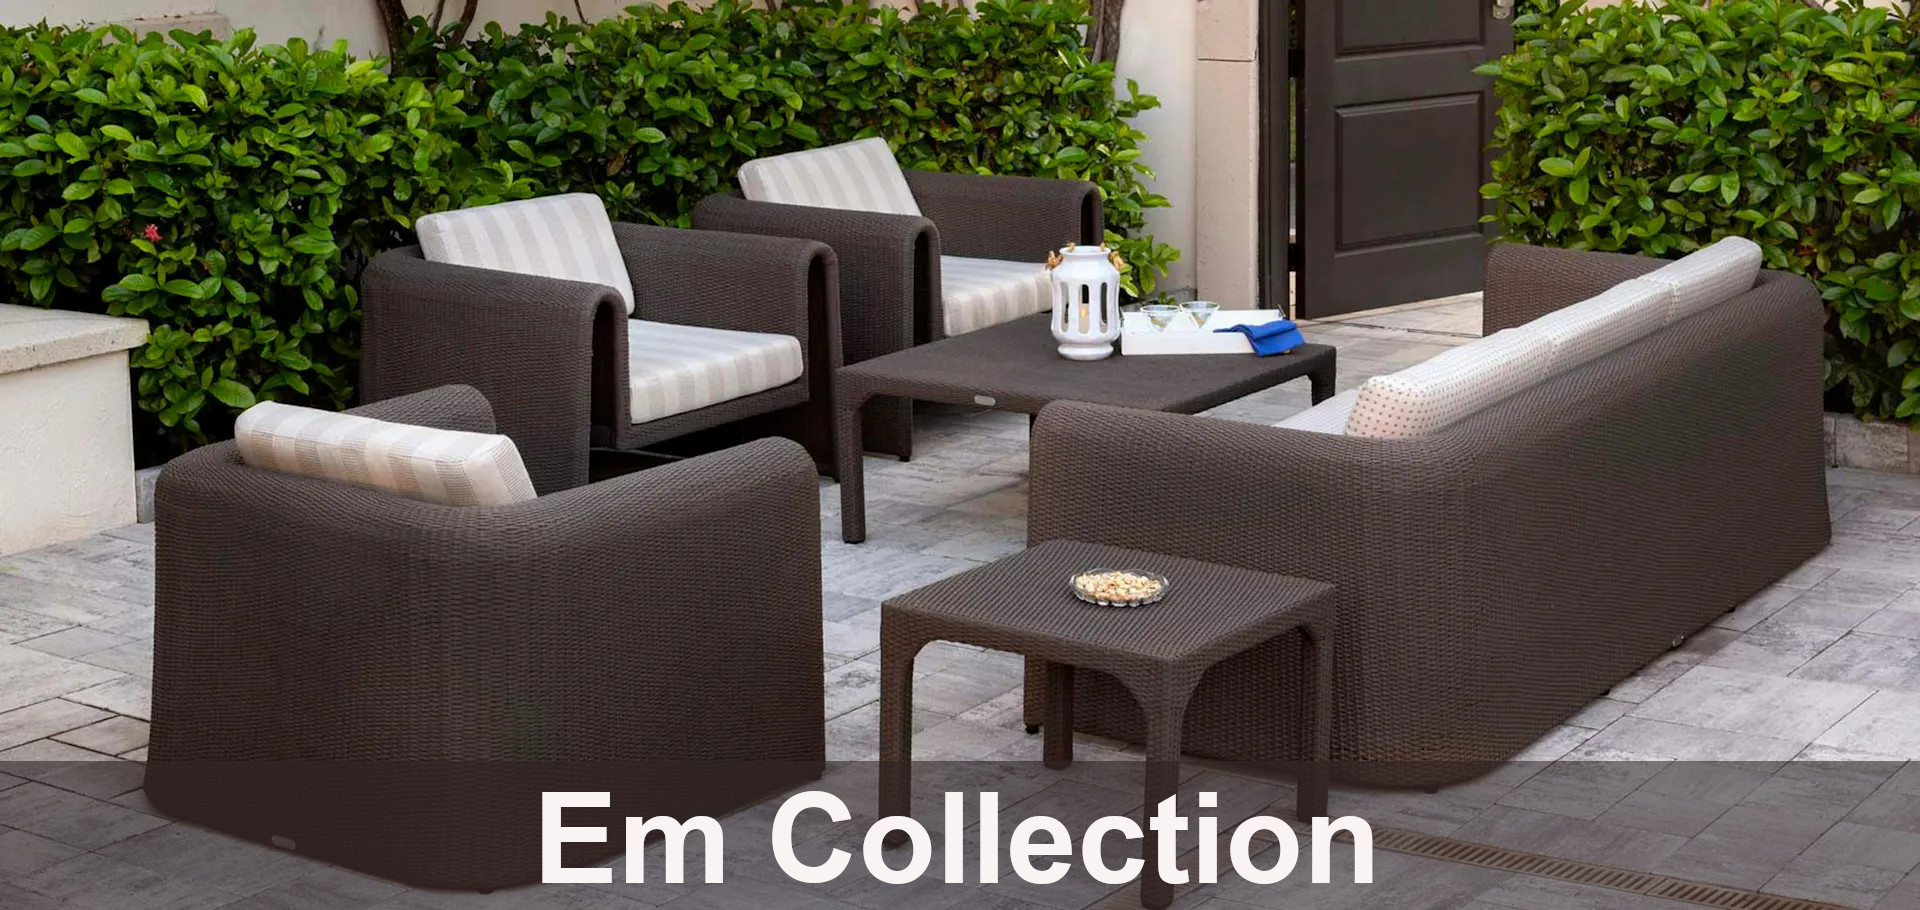 Em Collection Lounge Furnishings